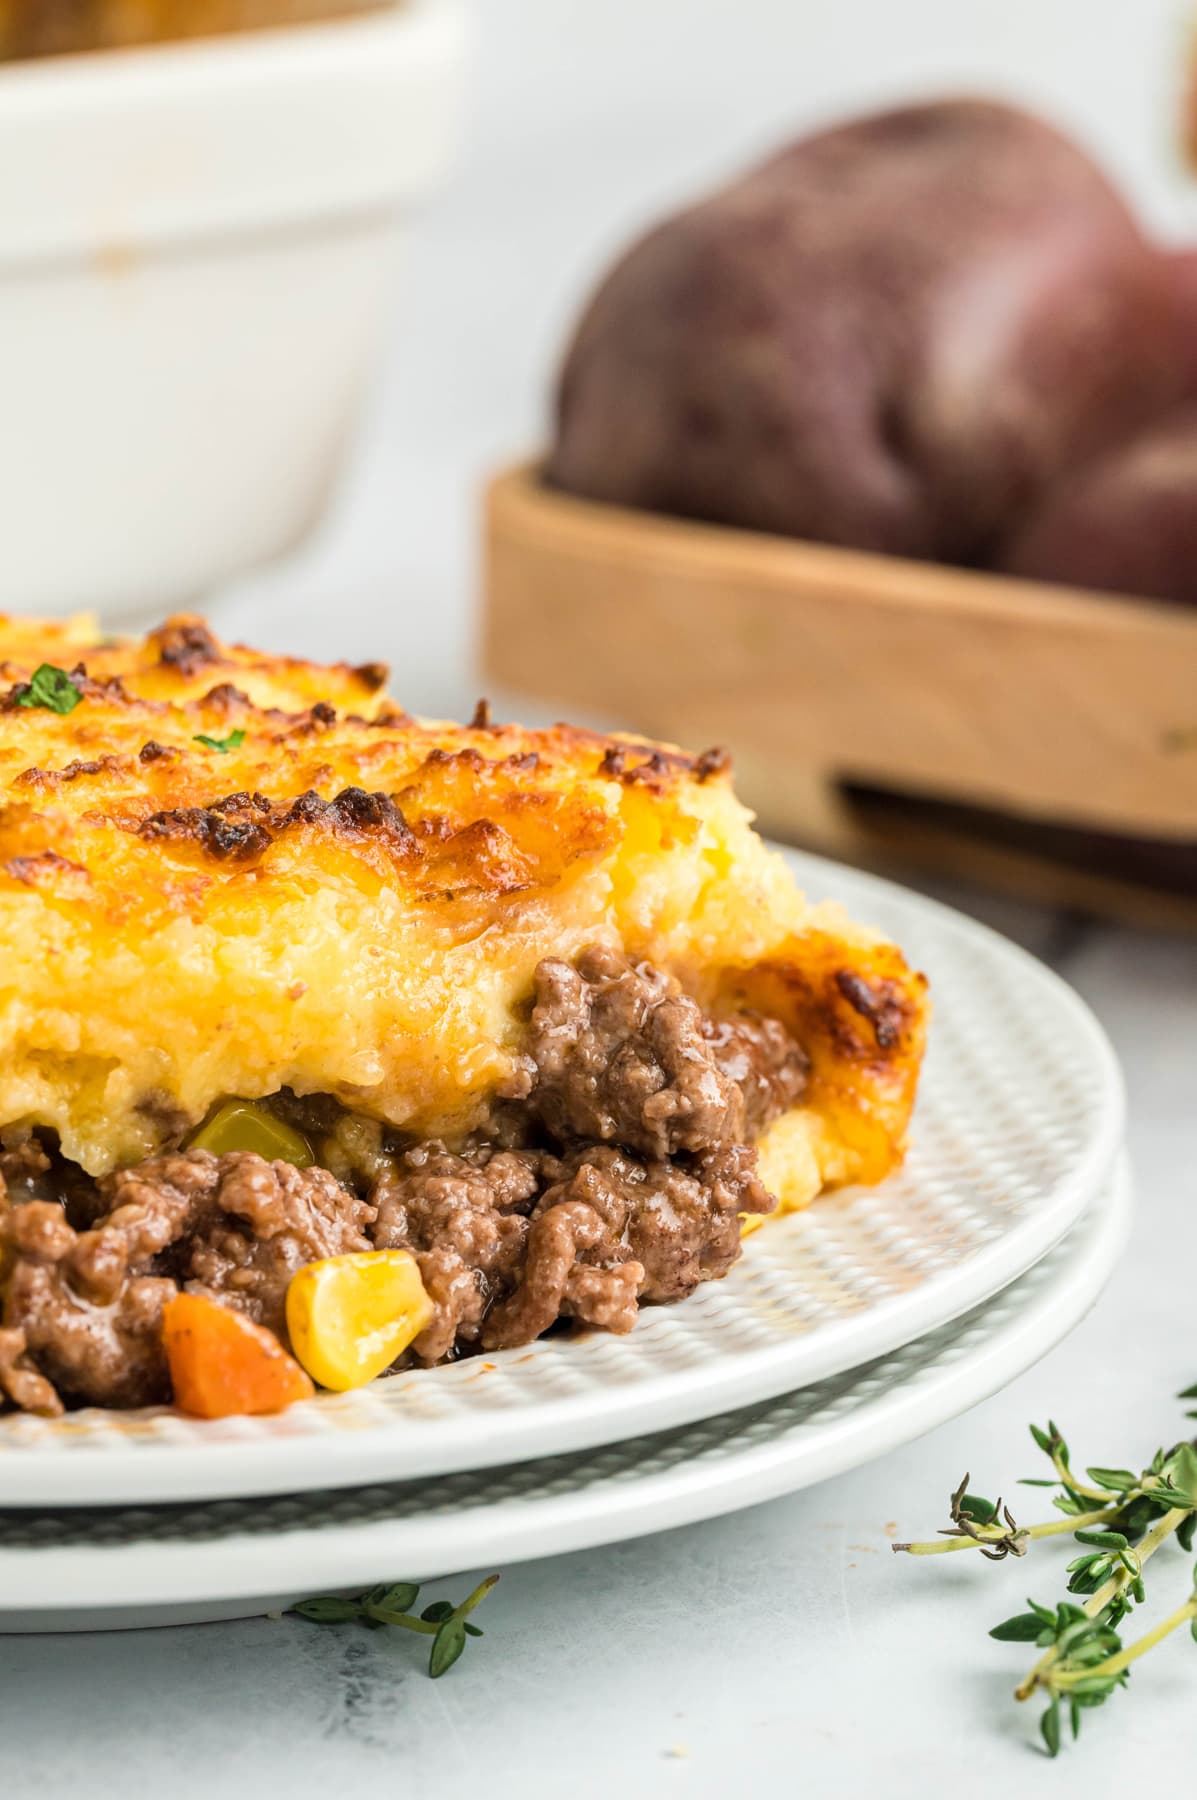 A serving of shepherd's pie on a plate